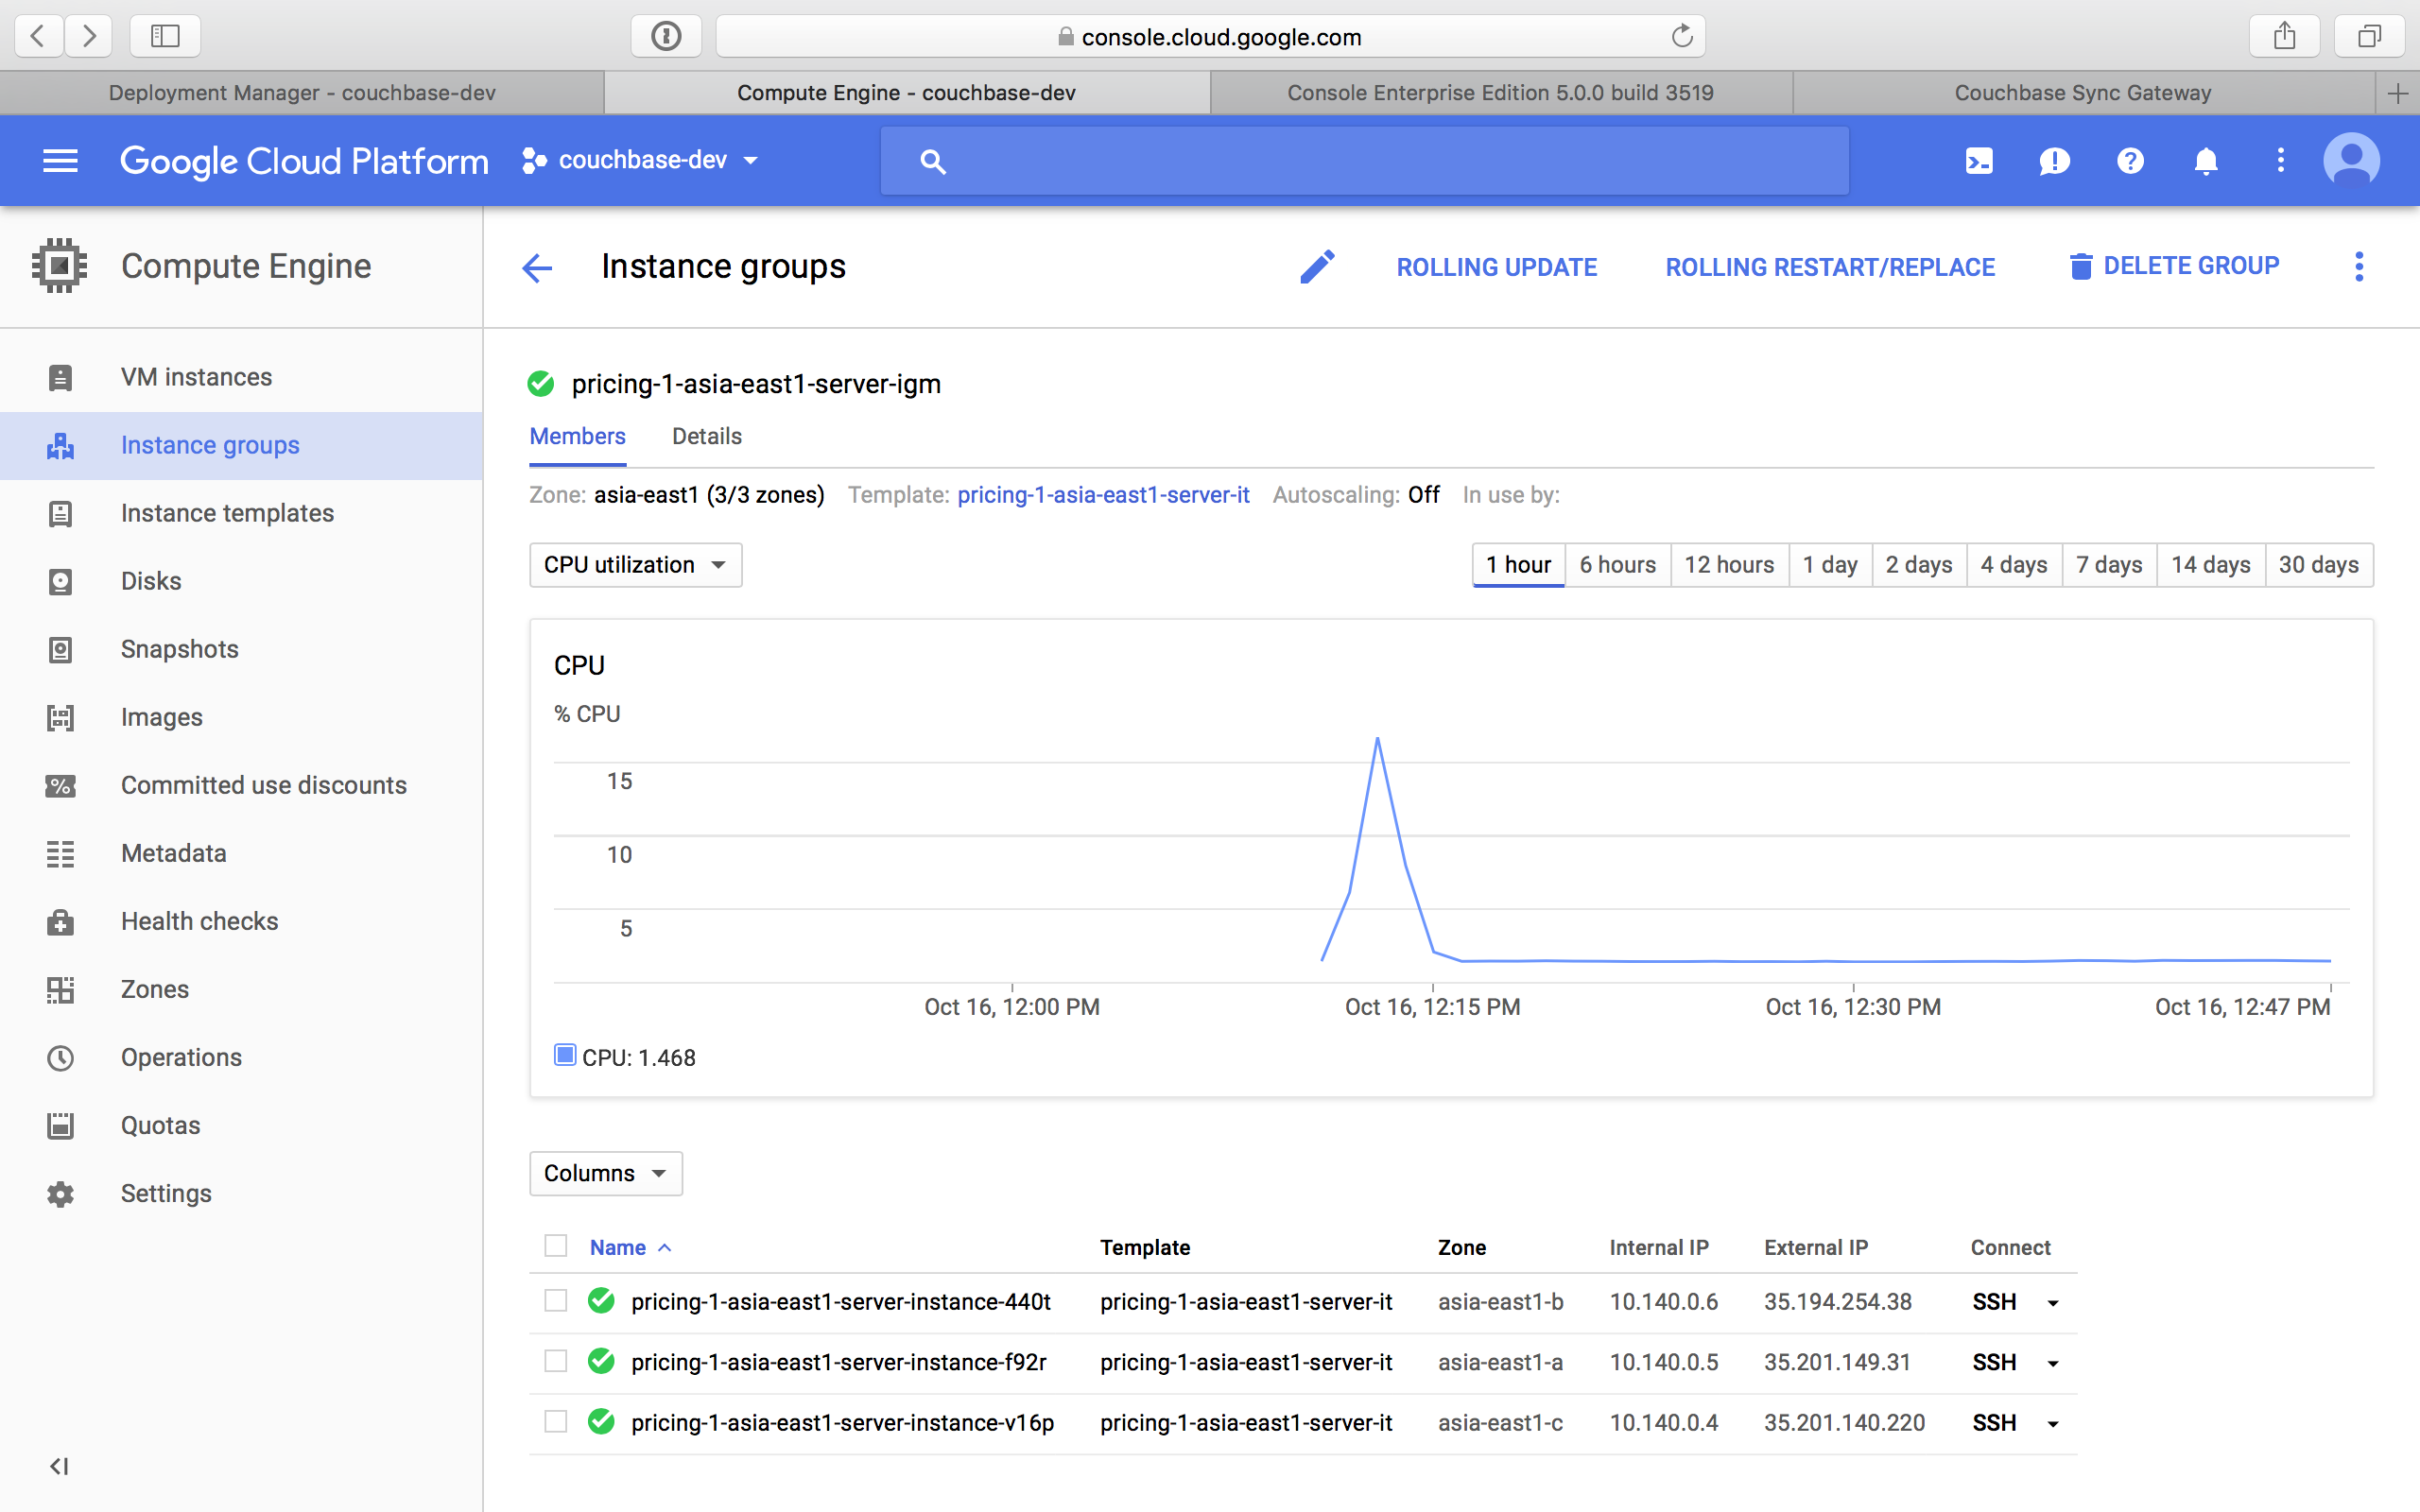 gcp server instance group members